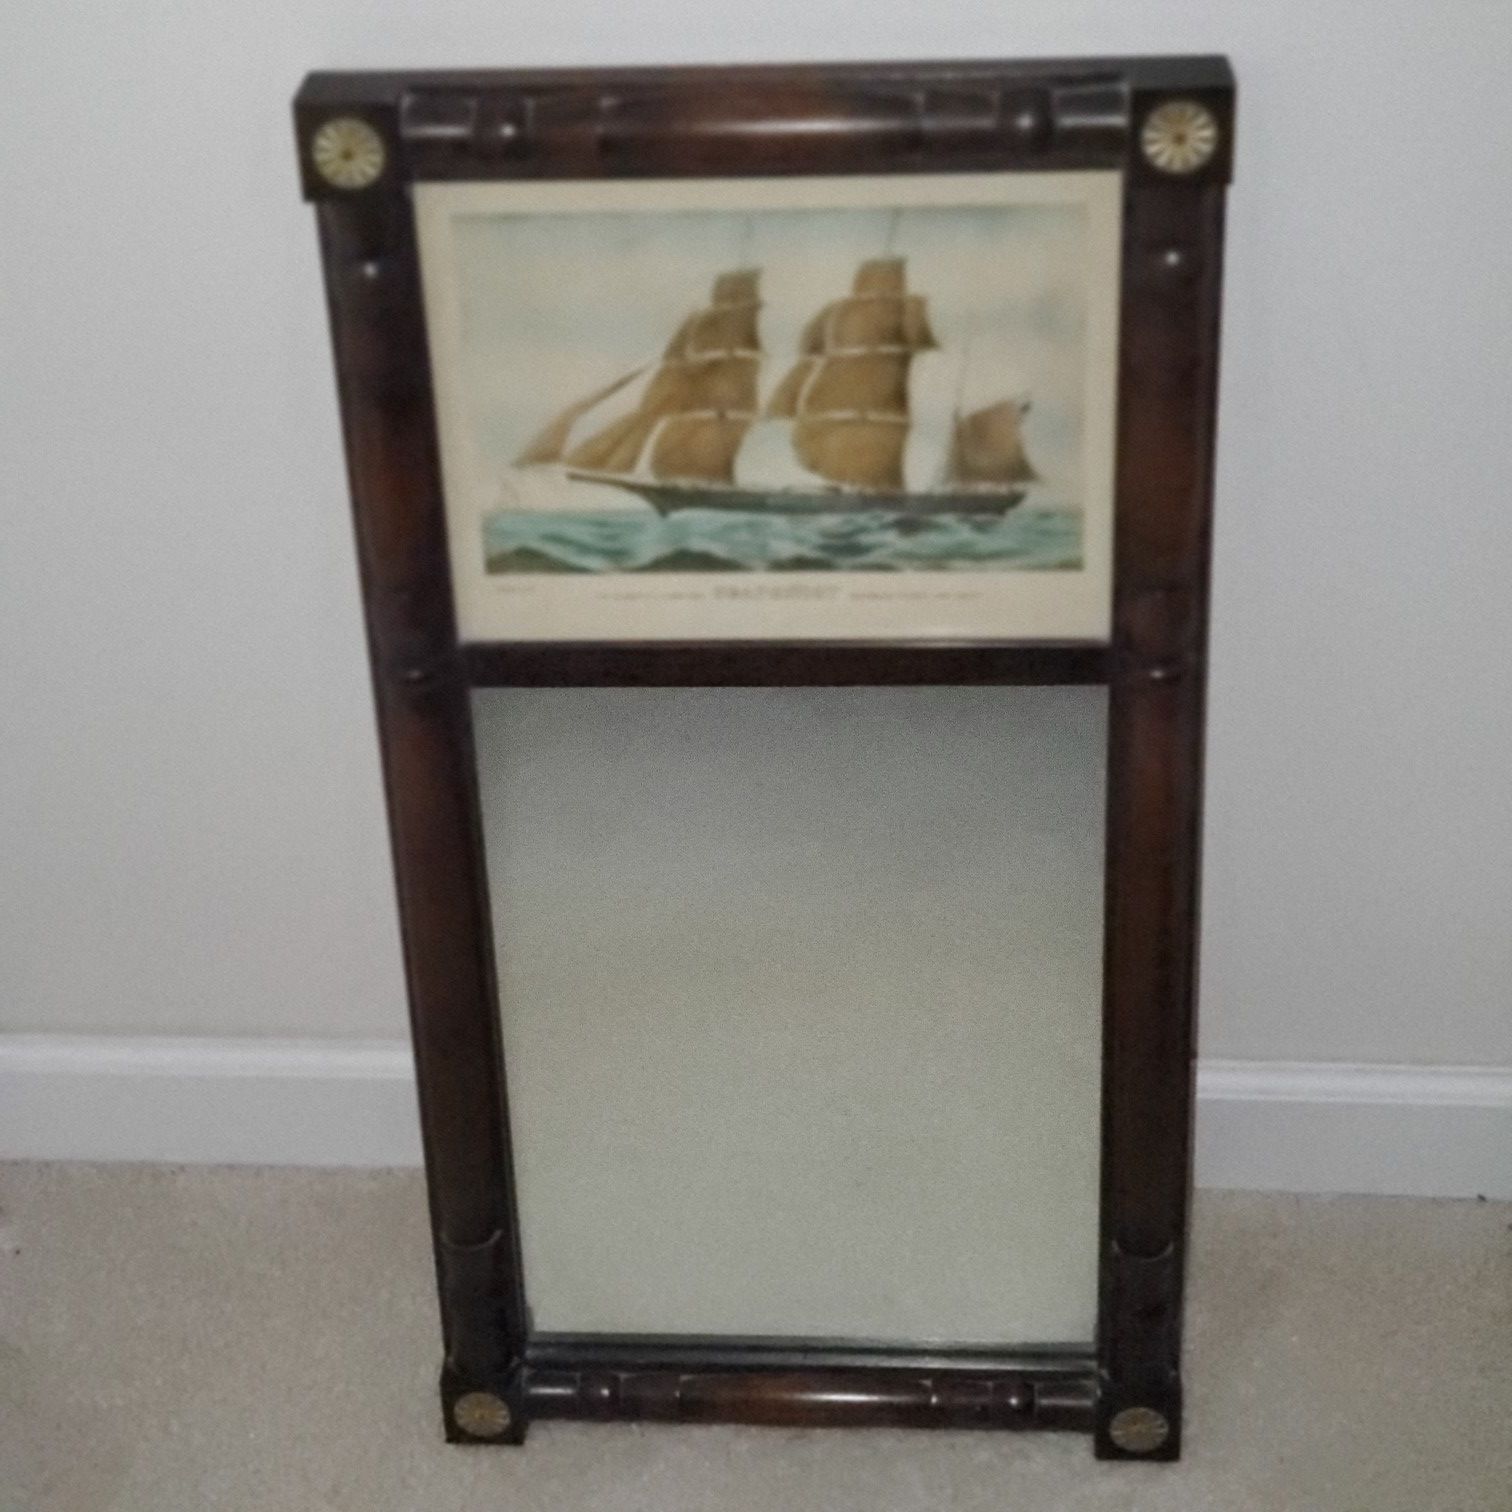 >>Antique Wall Art & Mirror with Beautiful Carved Wood Frame & Gold Accents